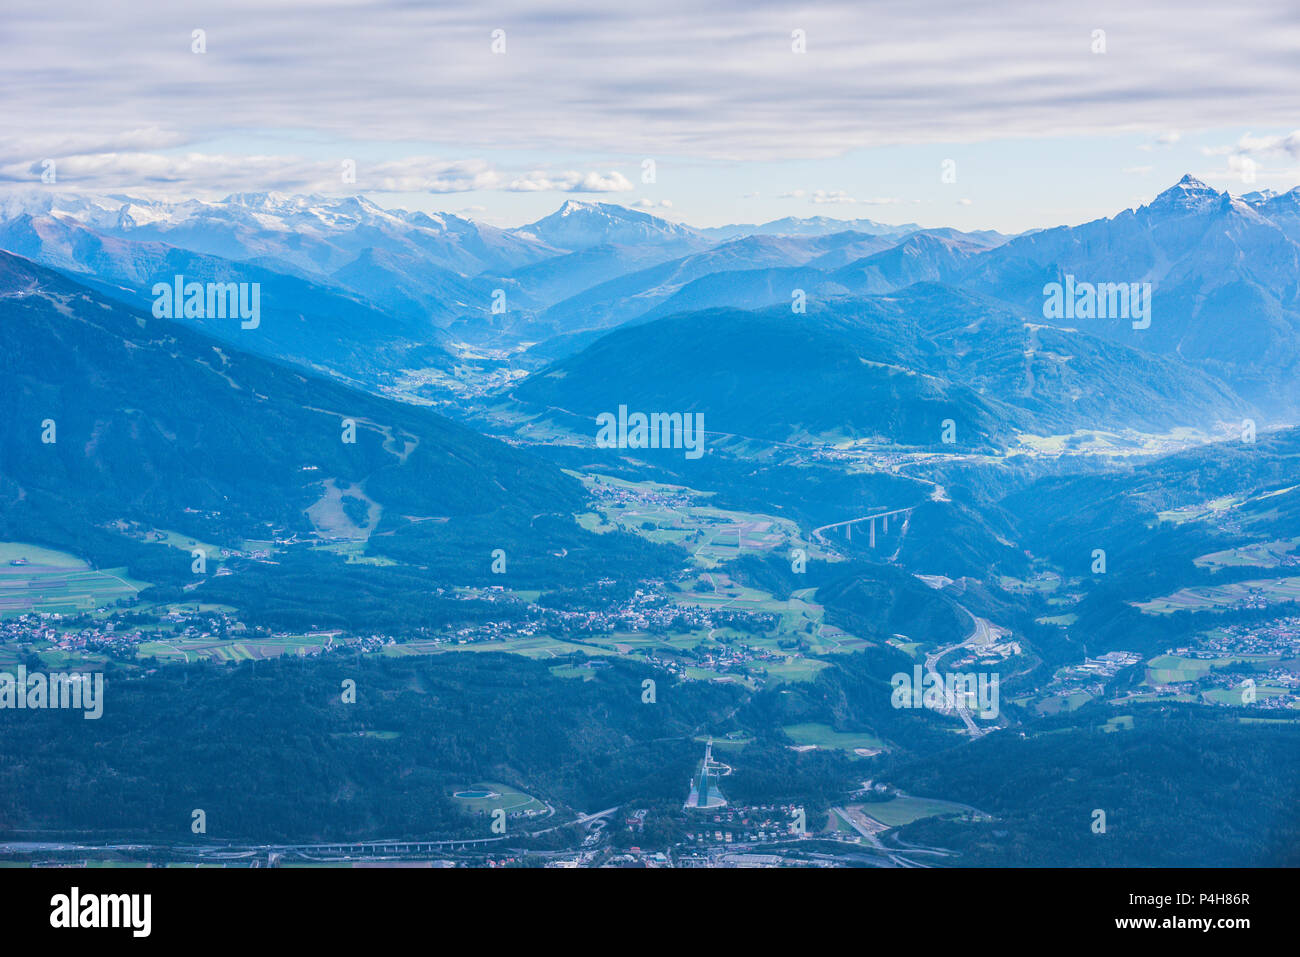 Brenner Pass Highway High Resolution Stock Photography and Images - Alamy